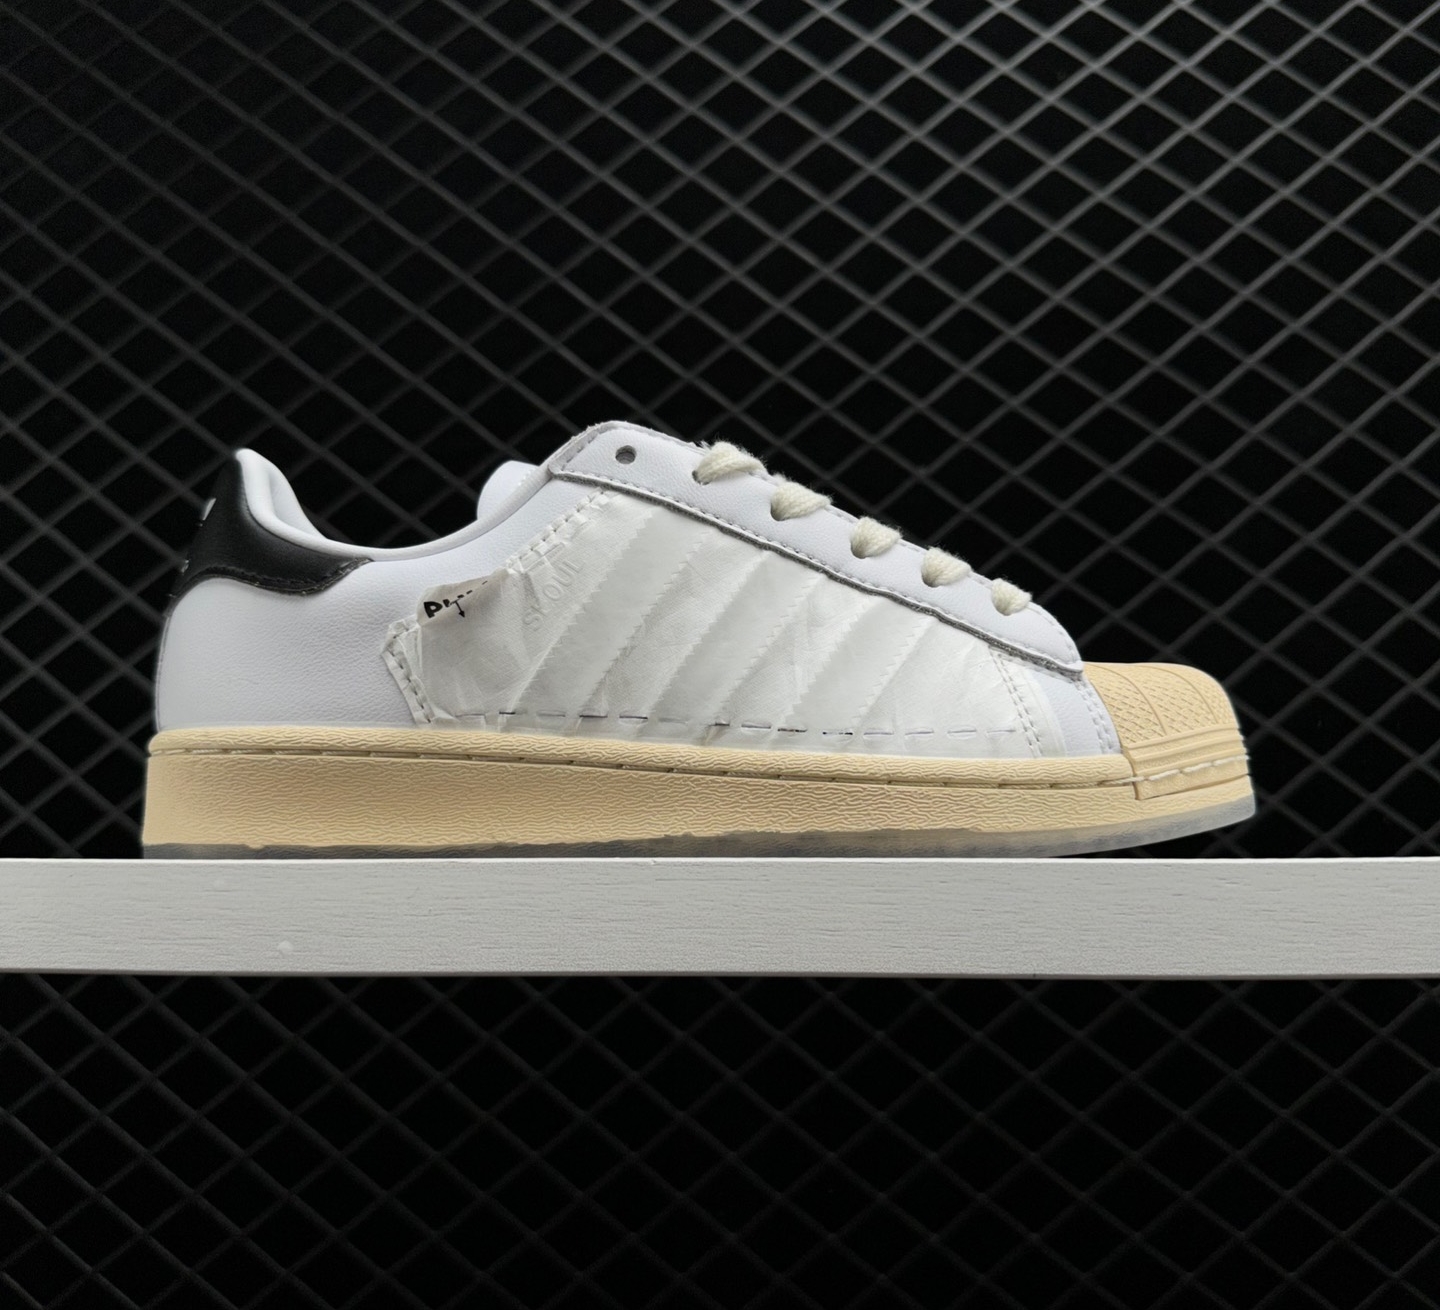 Adidas Superstar 'White Black' FV2831 - Classic Style and Timeless Appeal